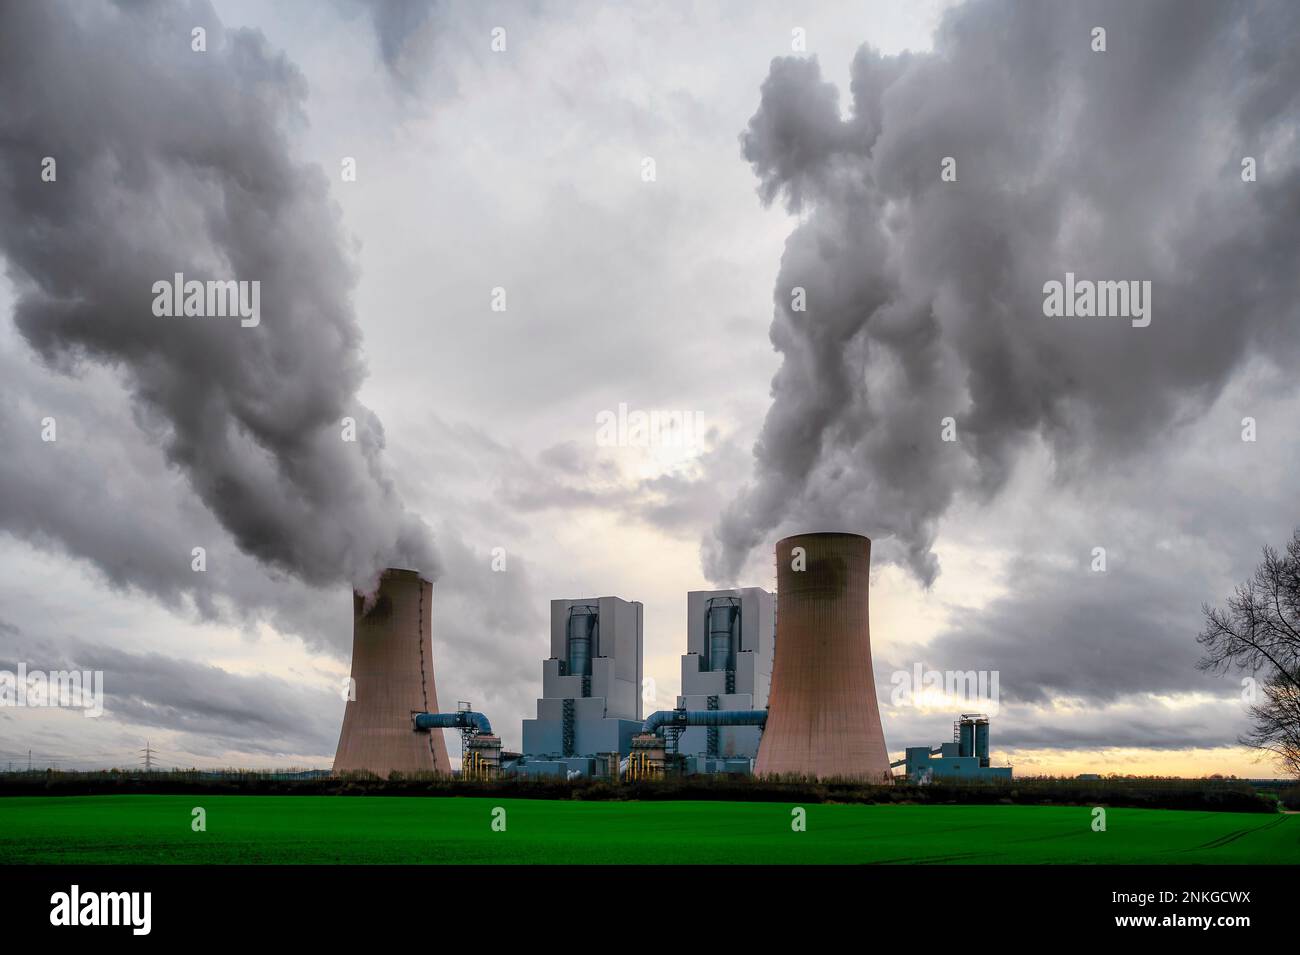 Germany, North Rhine Westphalia, Grevenbroich, Water vapor rising from cooling towers of lignite-fired power station Stock Photo